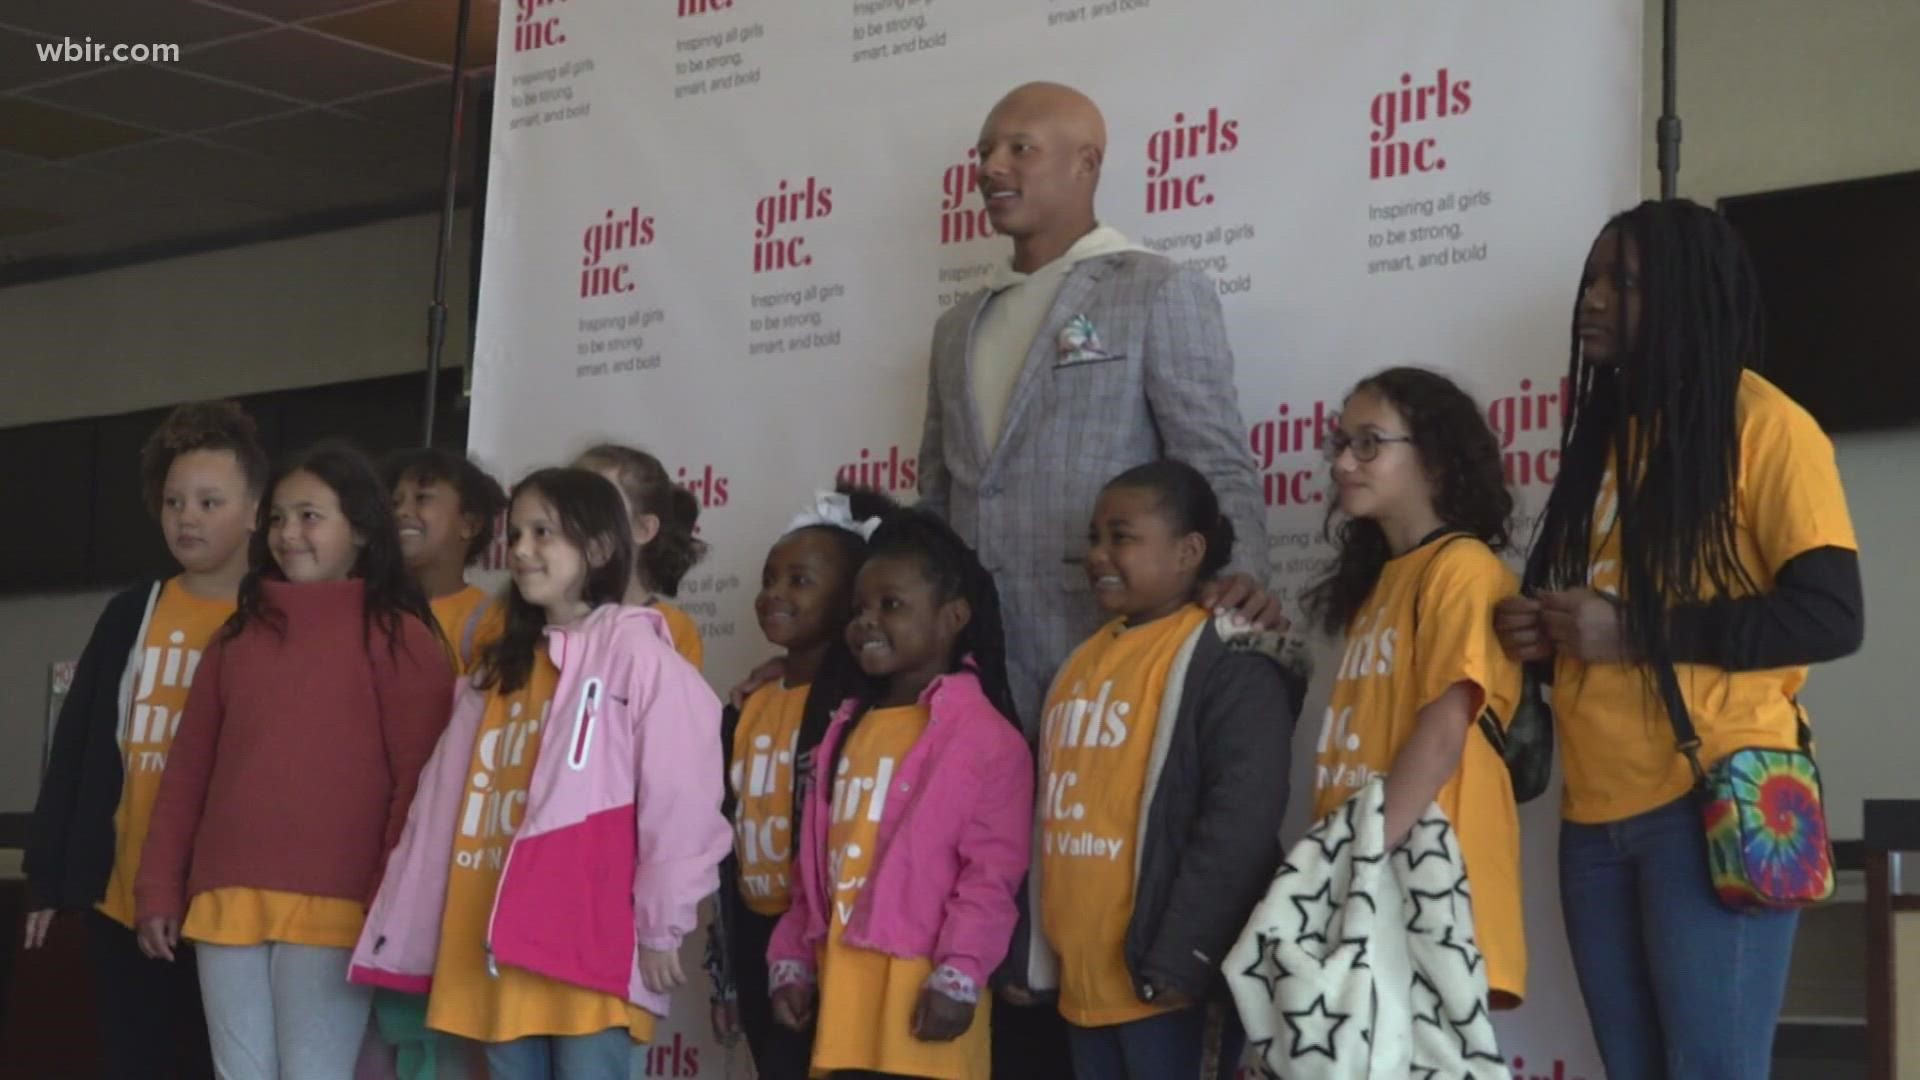 In 2019, Josh Dobbs treated girls with the nonprofit to a screening of 'Captain Marvel.' Now, he joined the organization to treat young girls to a different movie.